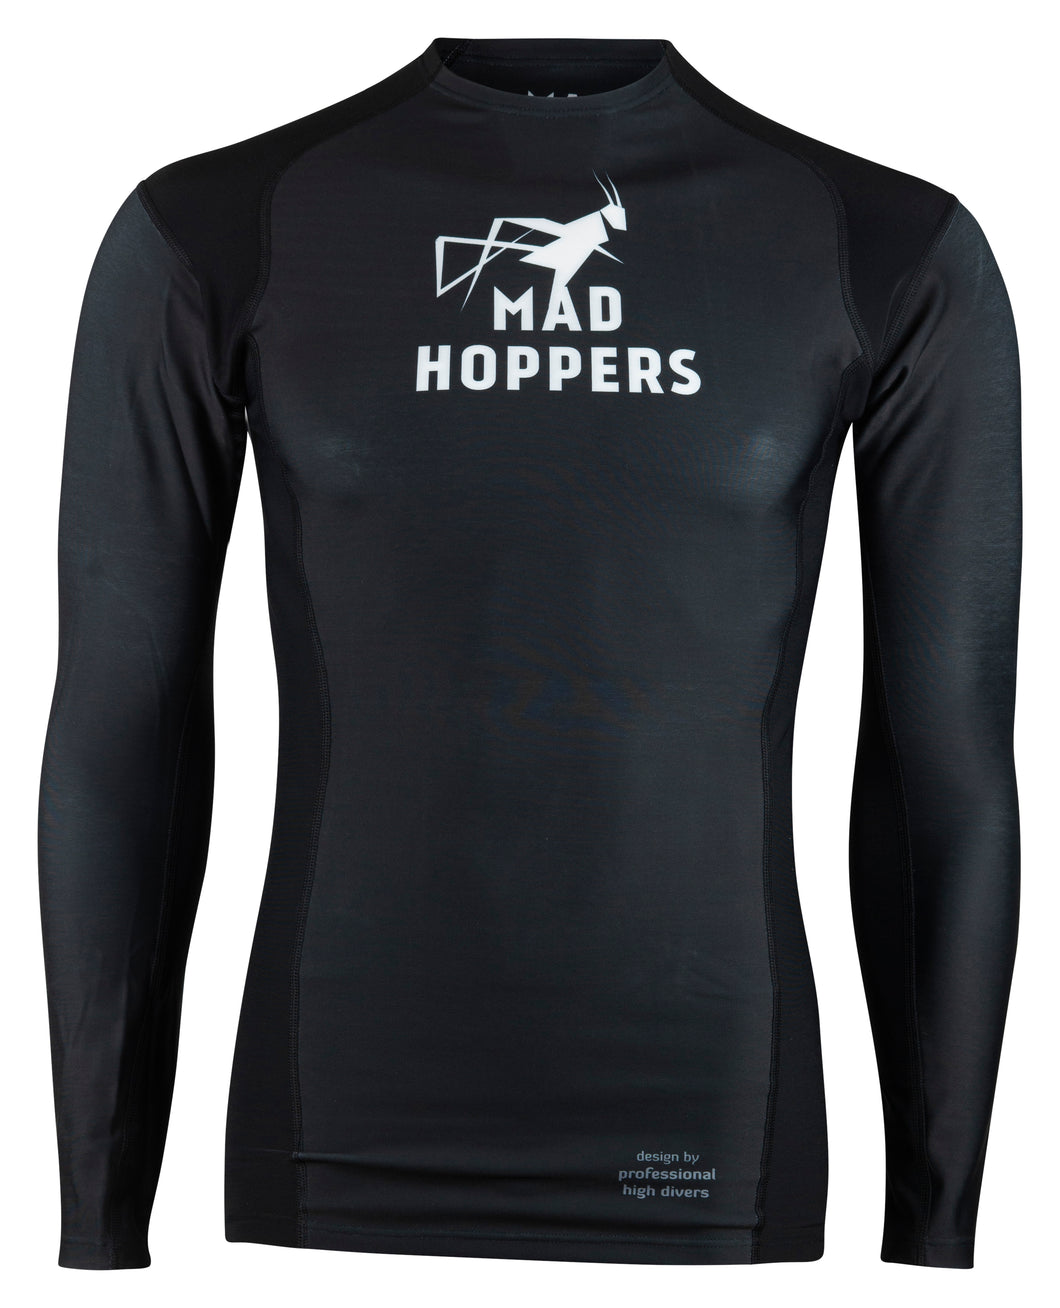 Black Thermo Shirt Long Sleeve - Mad Hoppers